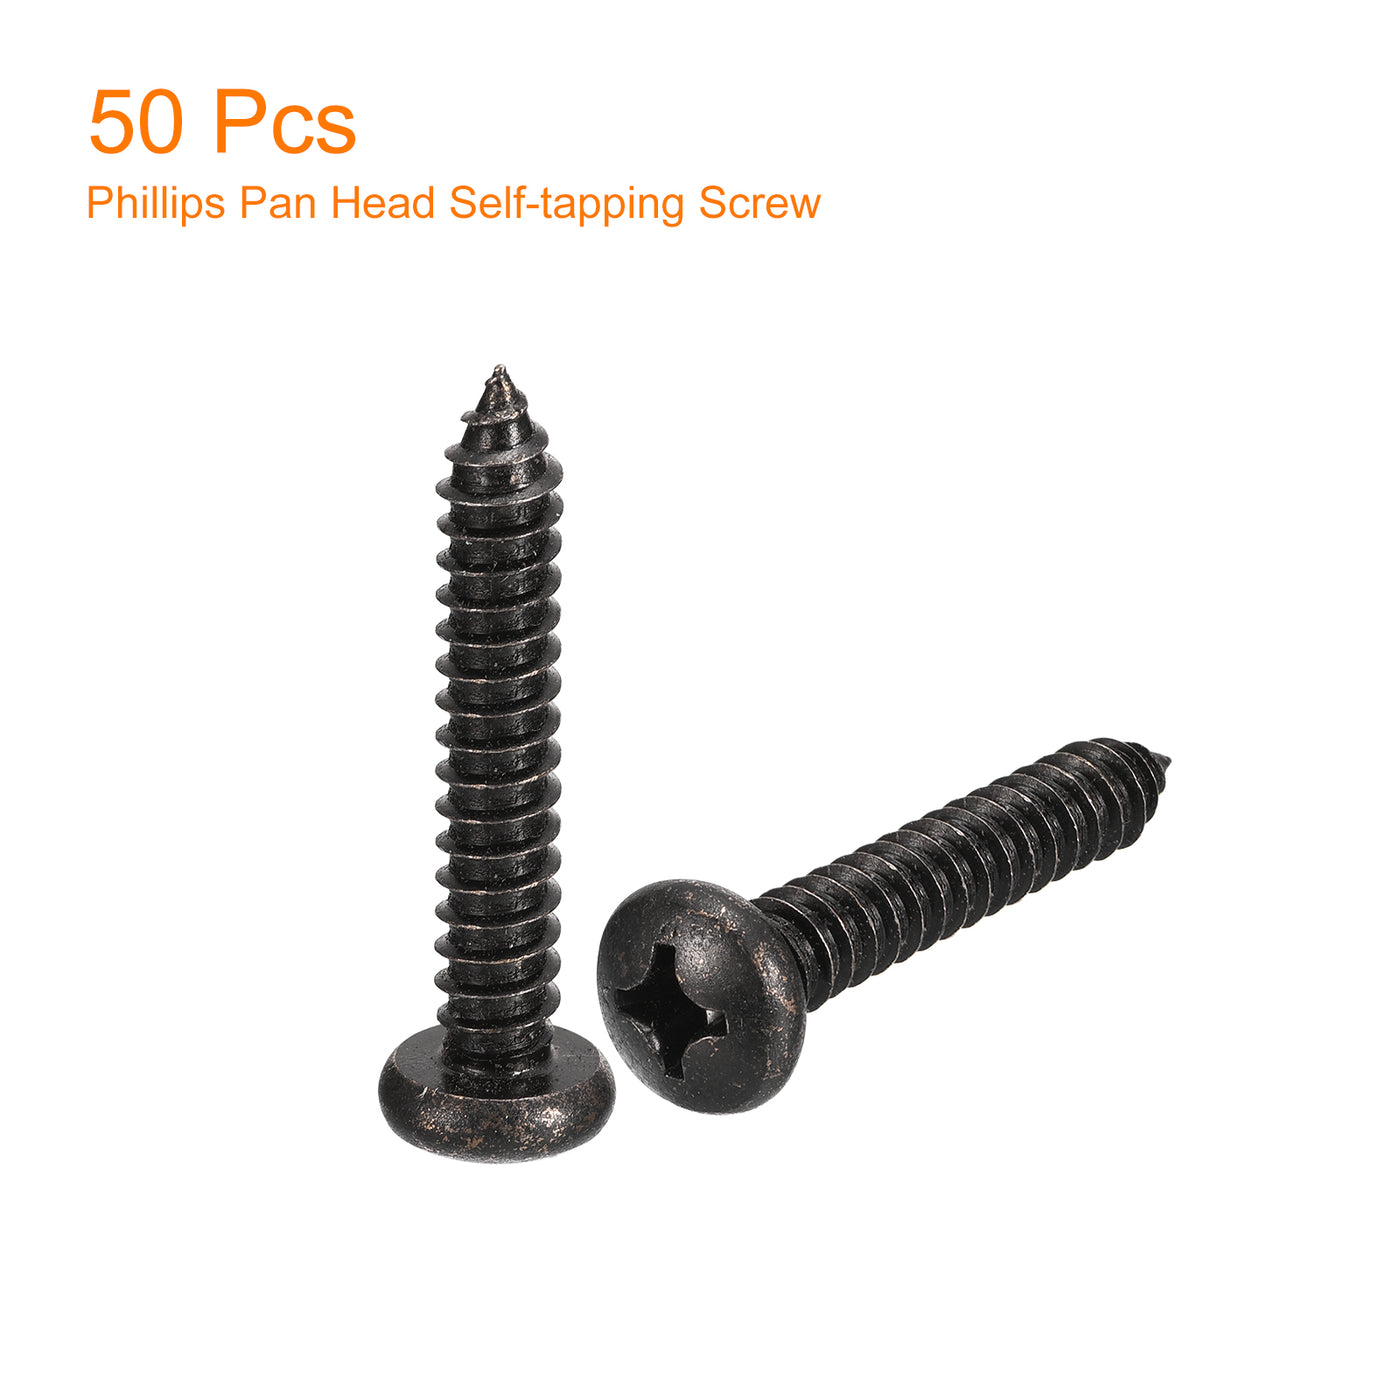 uxcell Uxcell #12 x 1-1/2" Phillips Pan Head Self-tapping Screw, 50pcs - 304 Stainless Steel Round Head Wood Screw Full Thread (Black)